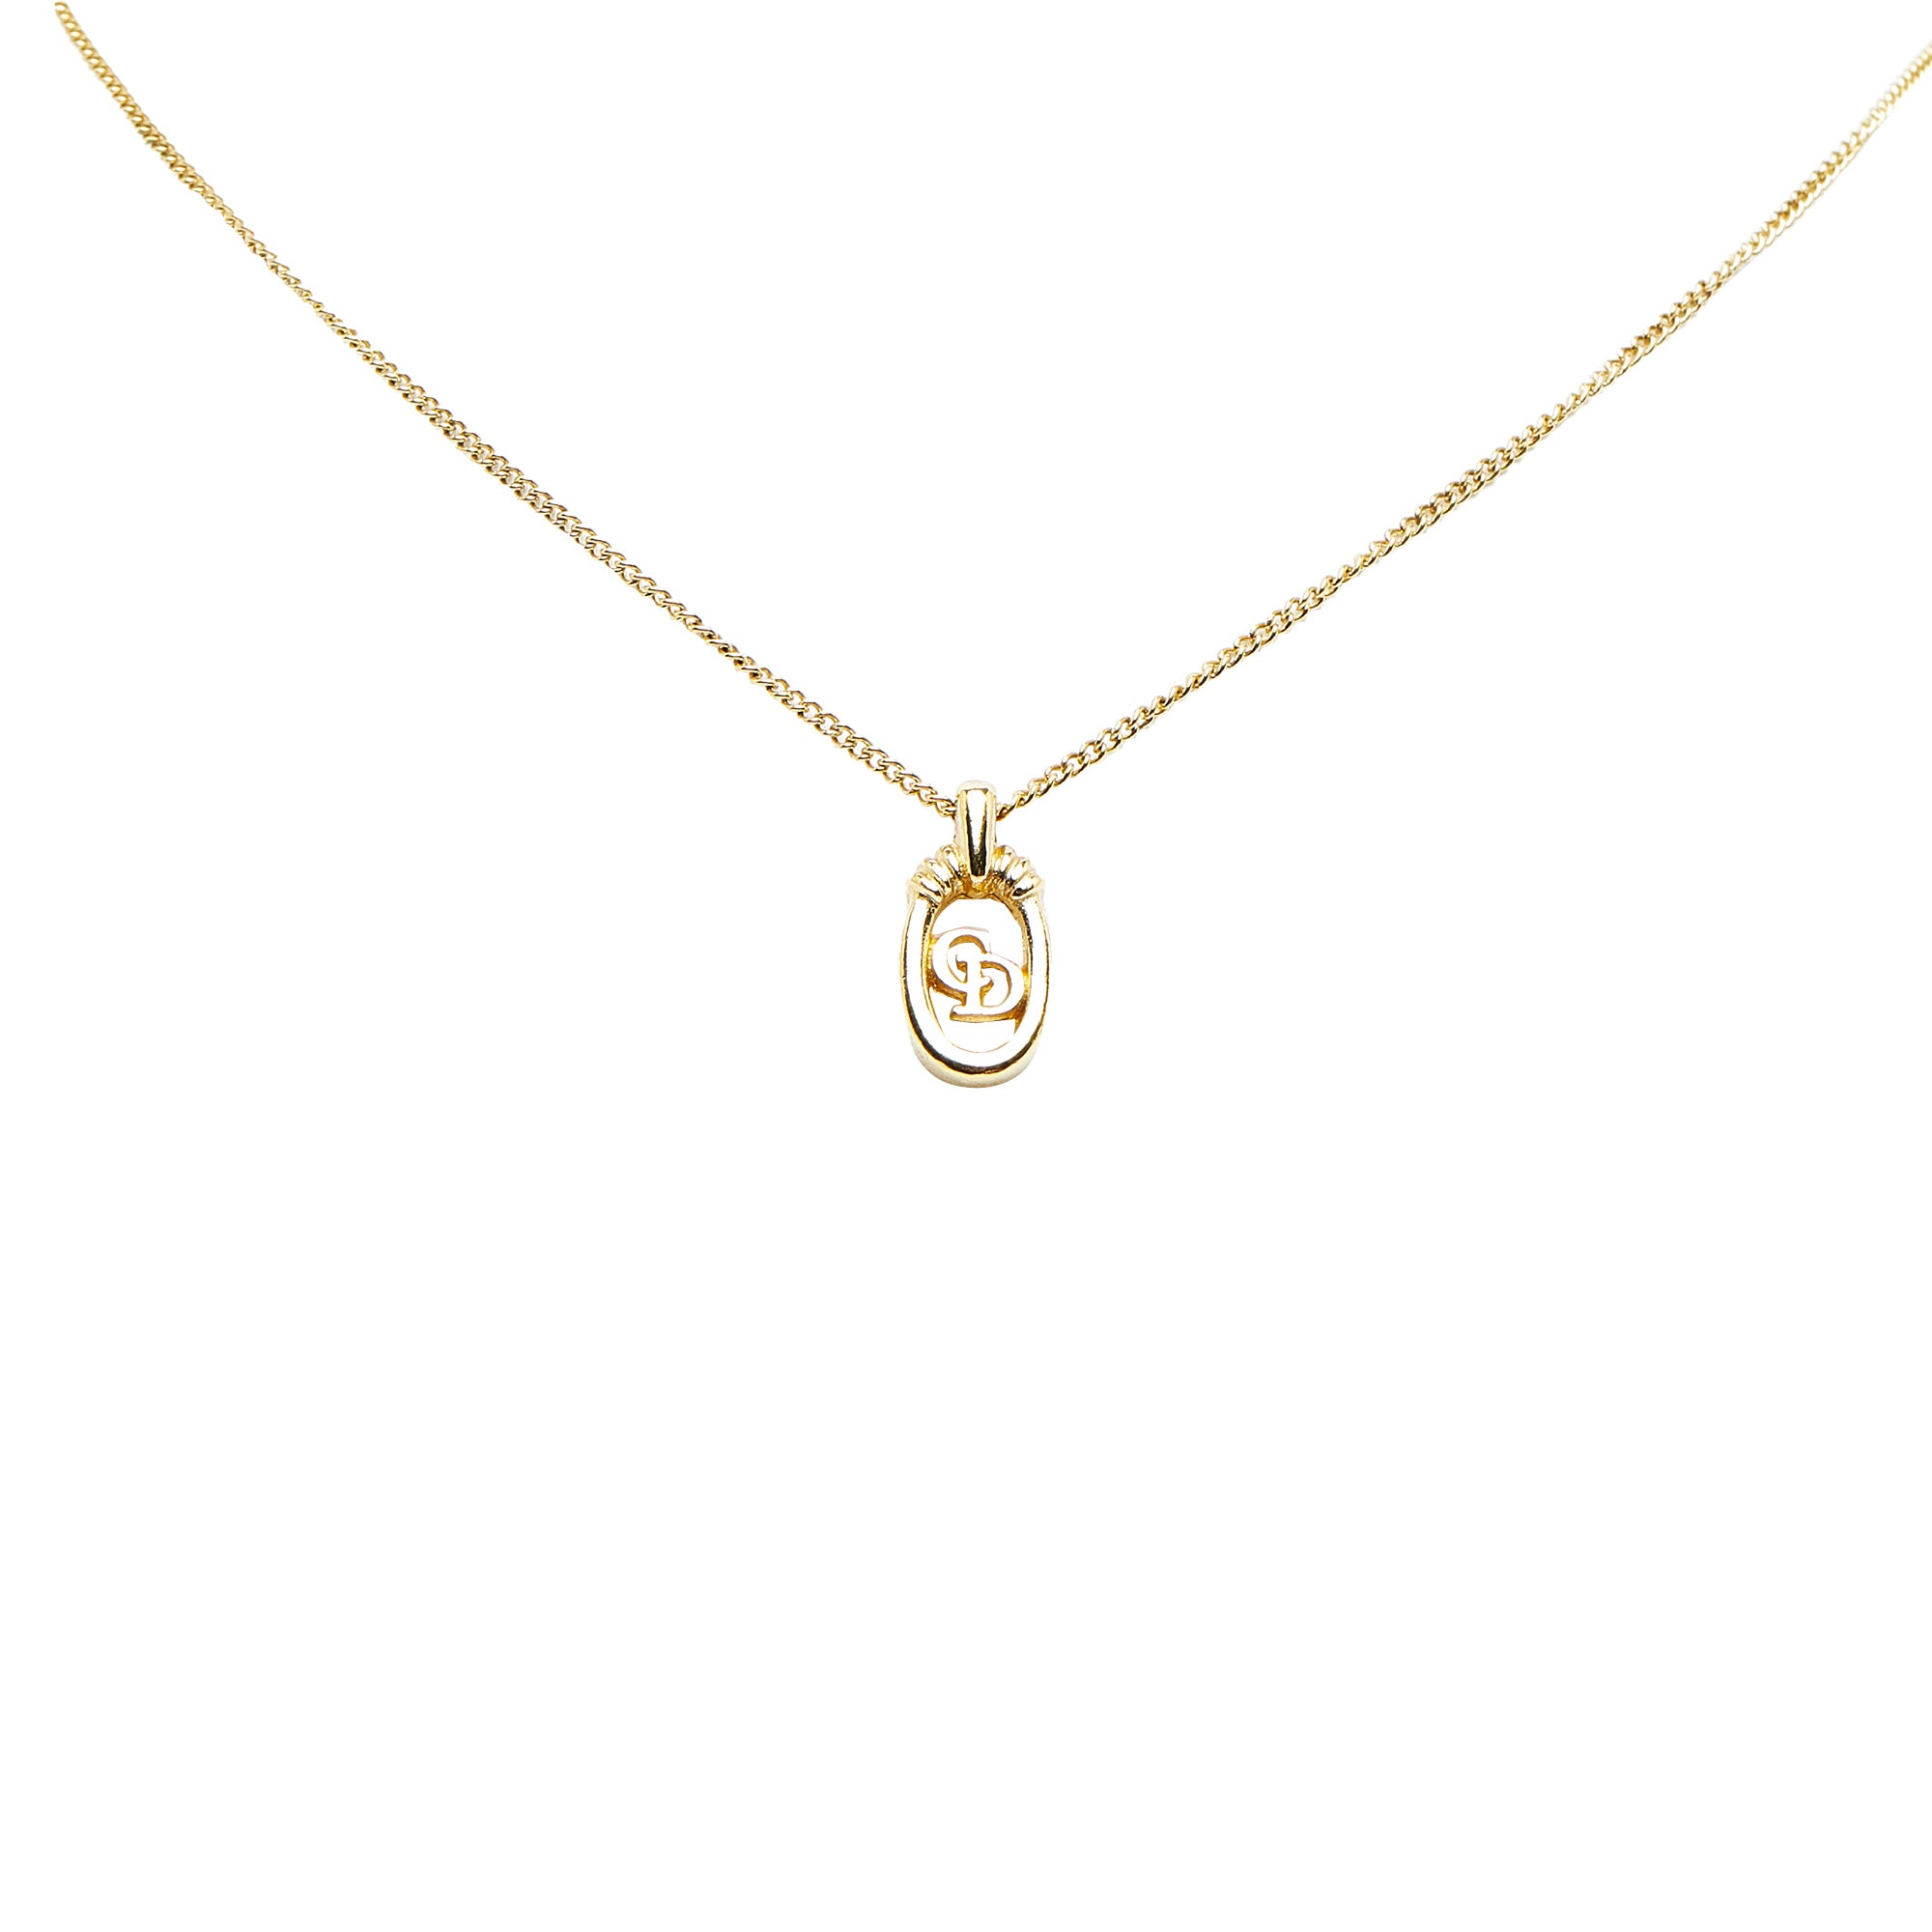 CD necklace ♥️gold plated | Gold necklace, Necklace, Gold